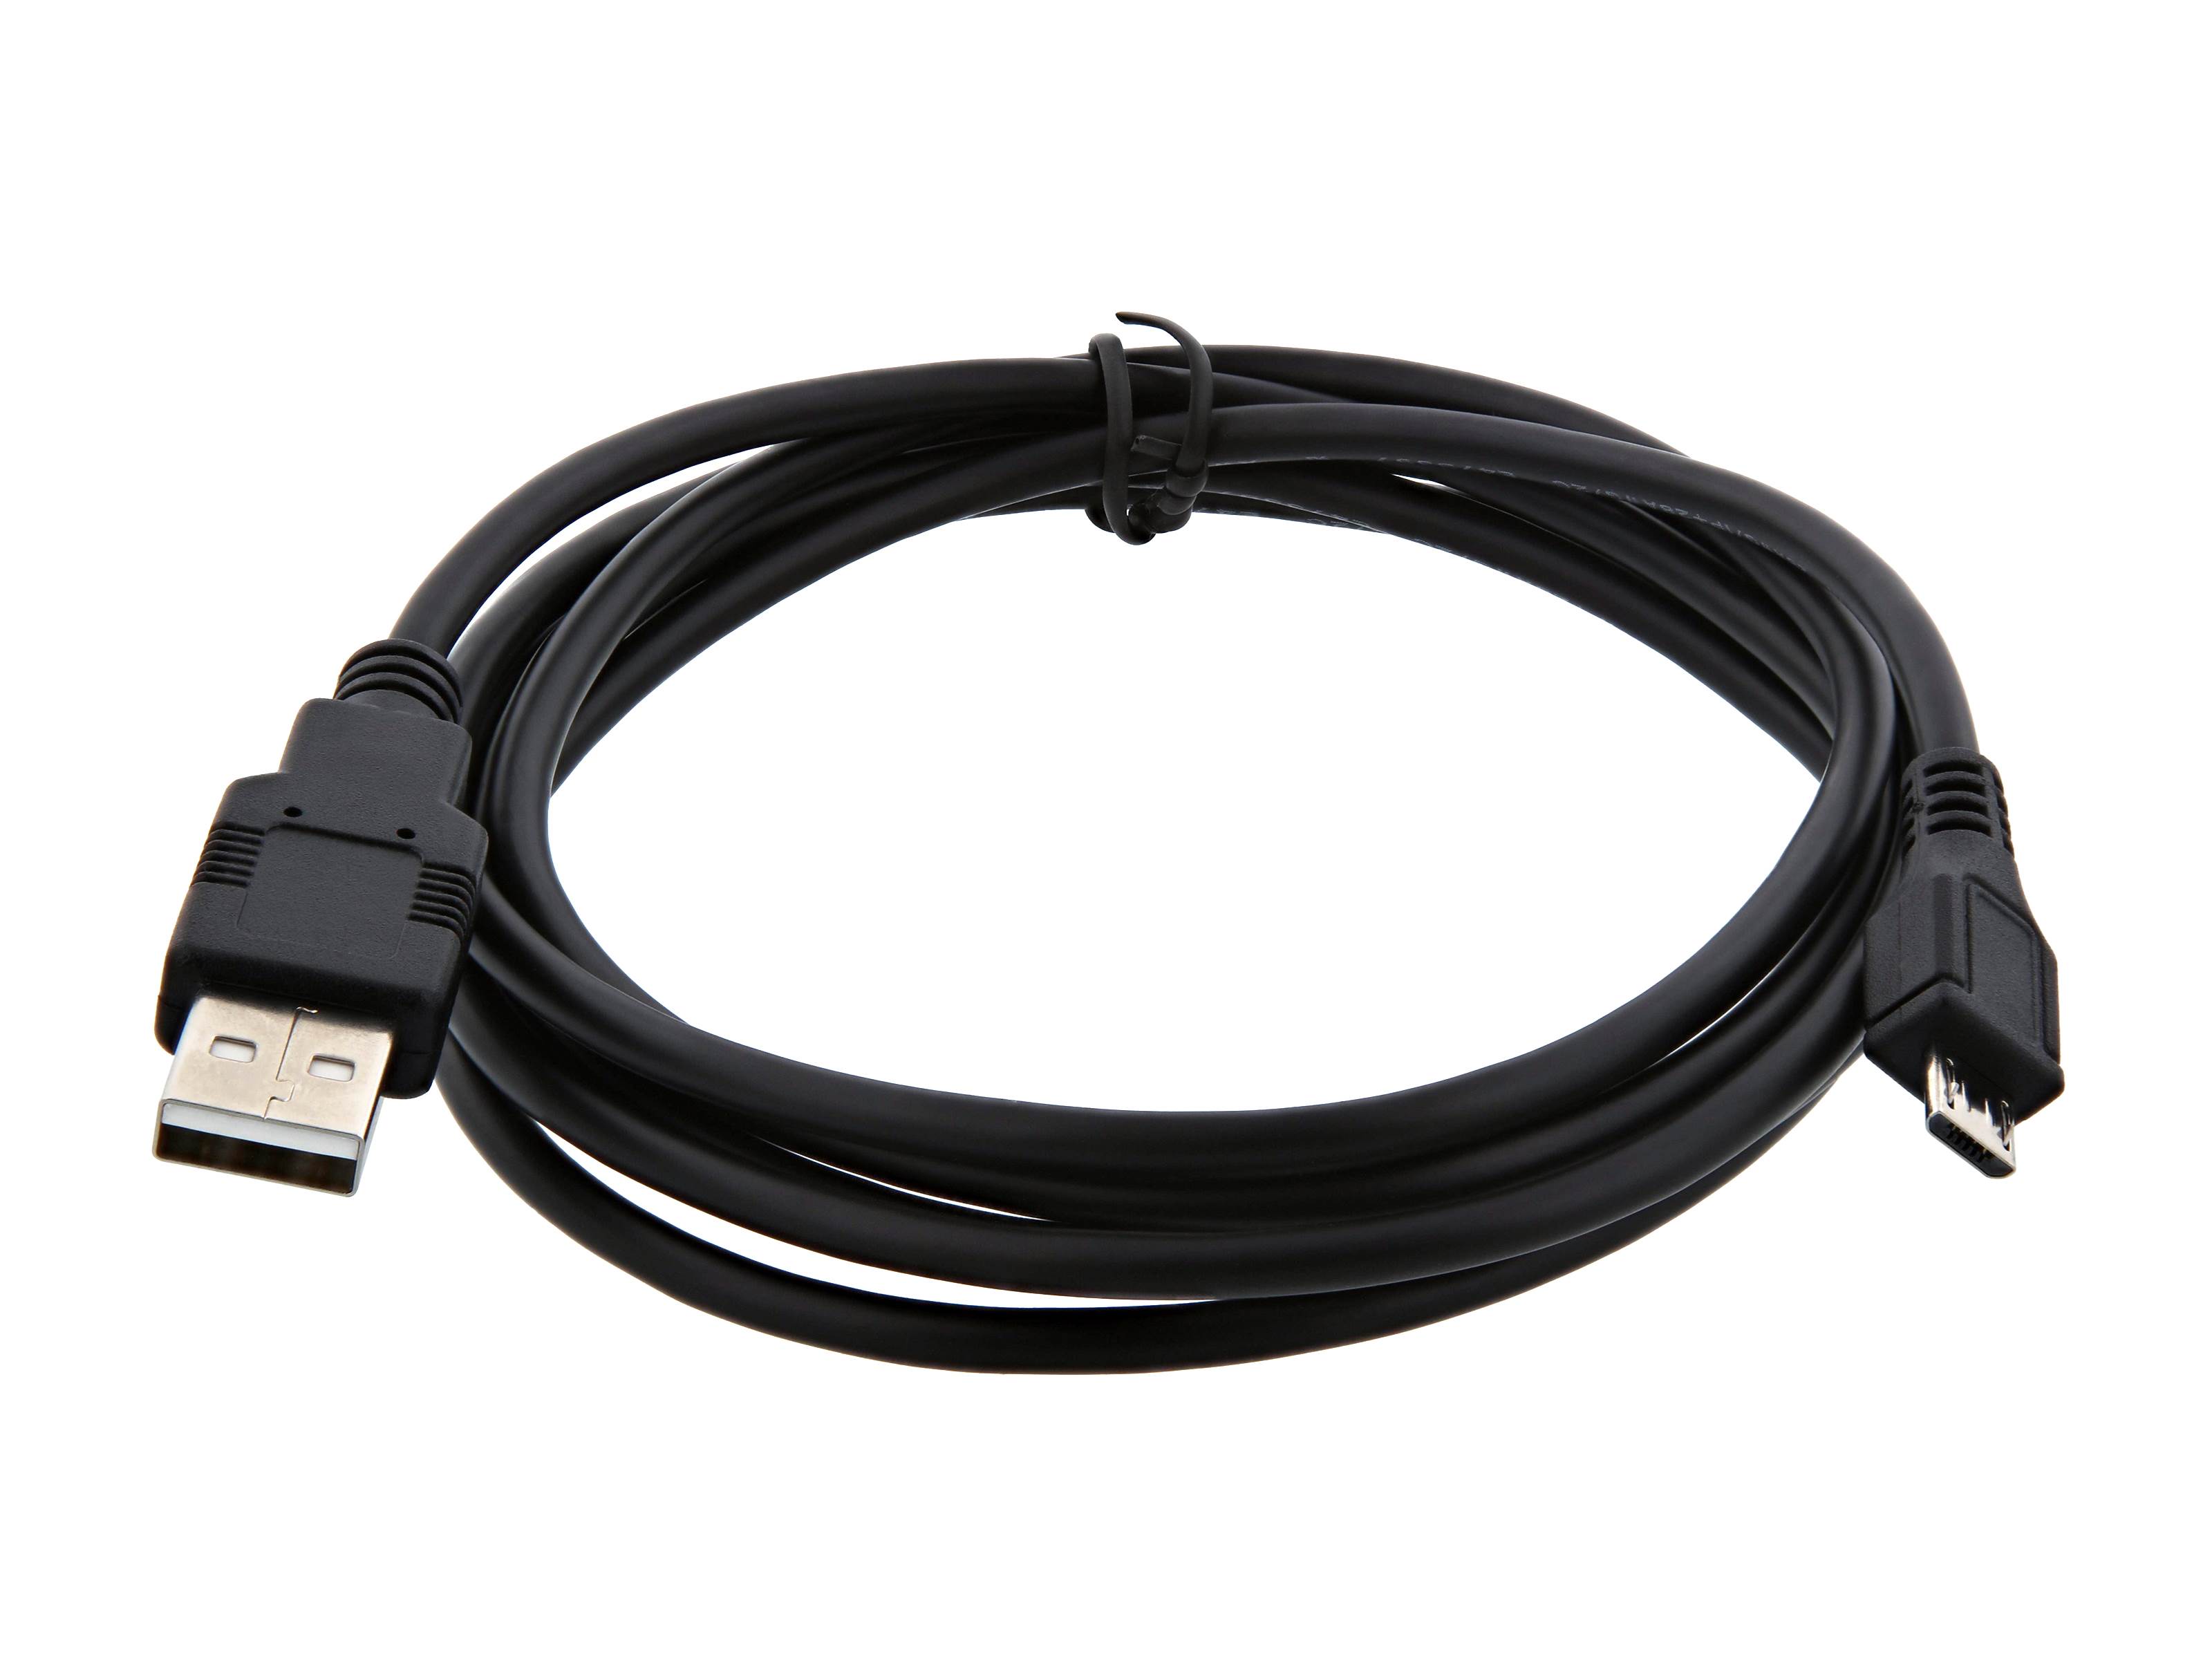 USB 2.0 Cable A to Micro M/M - 6 FT For PC or Mac